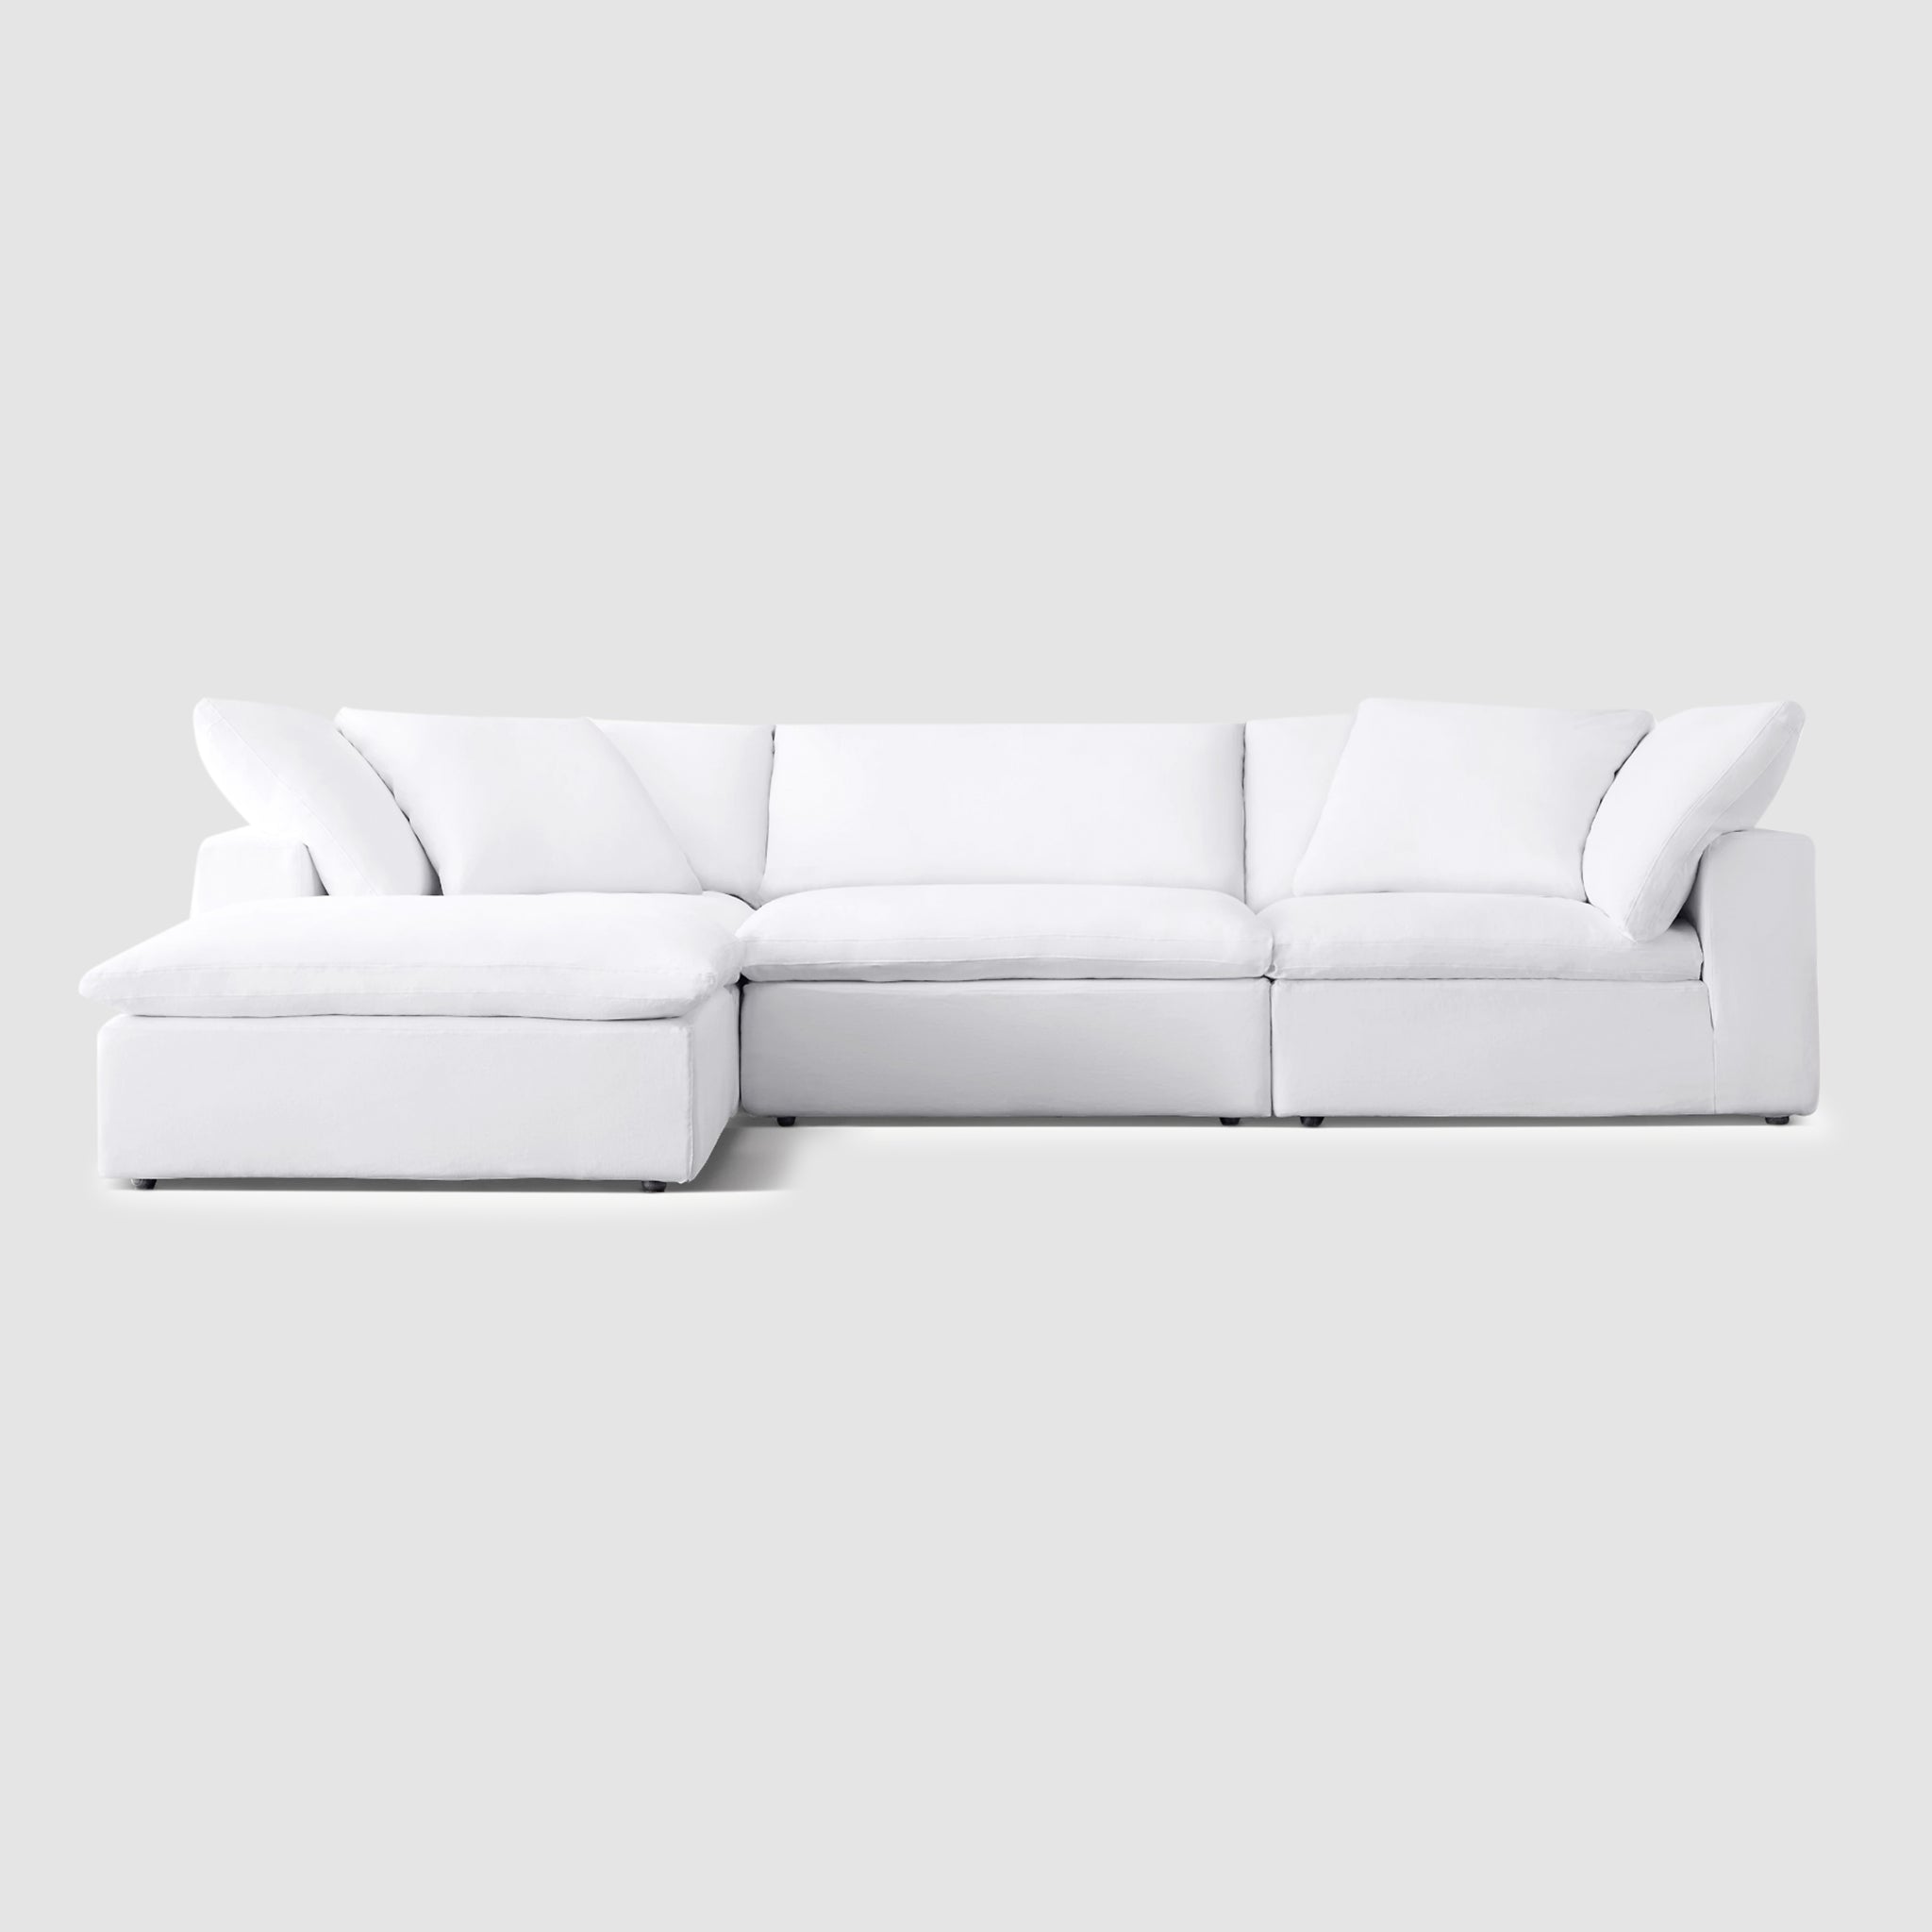 White sectional couch with detachable ottoman in a modern living room. The couch has soft, cloud-like cushions and a solid wood frame.